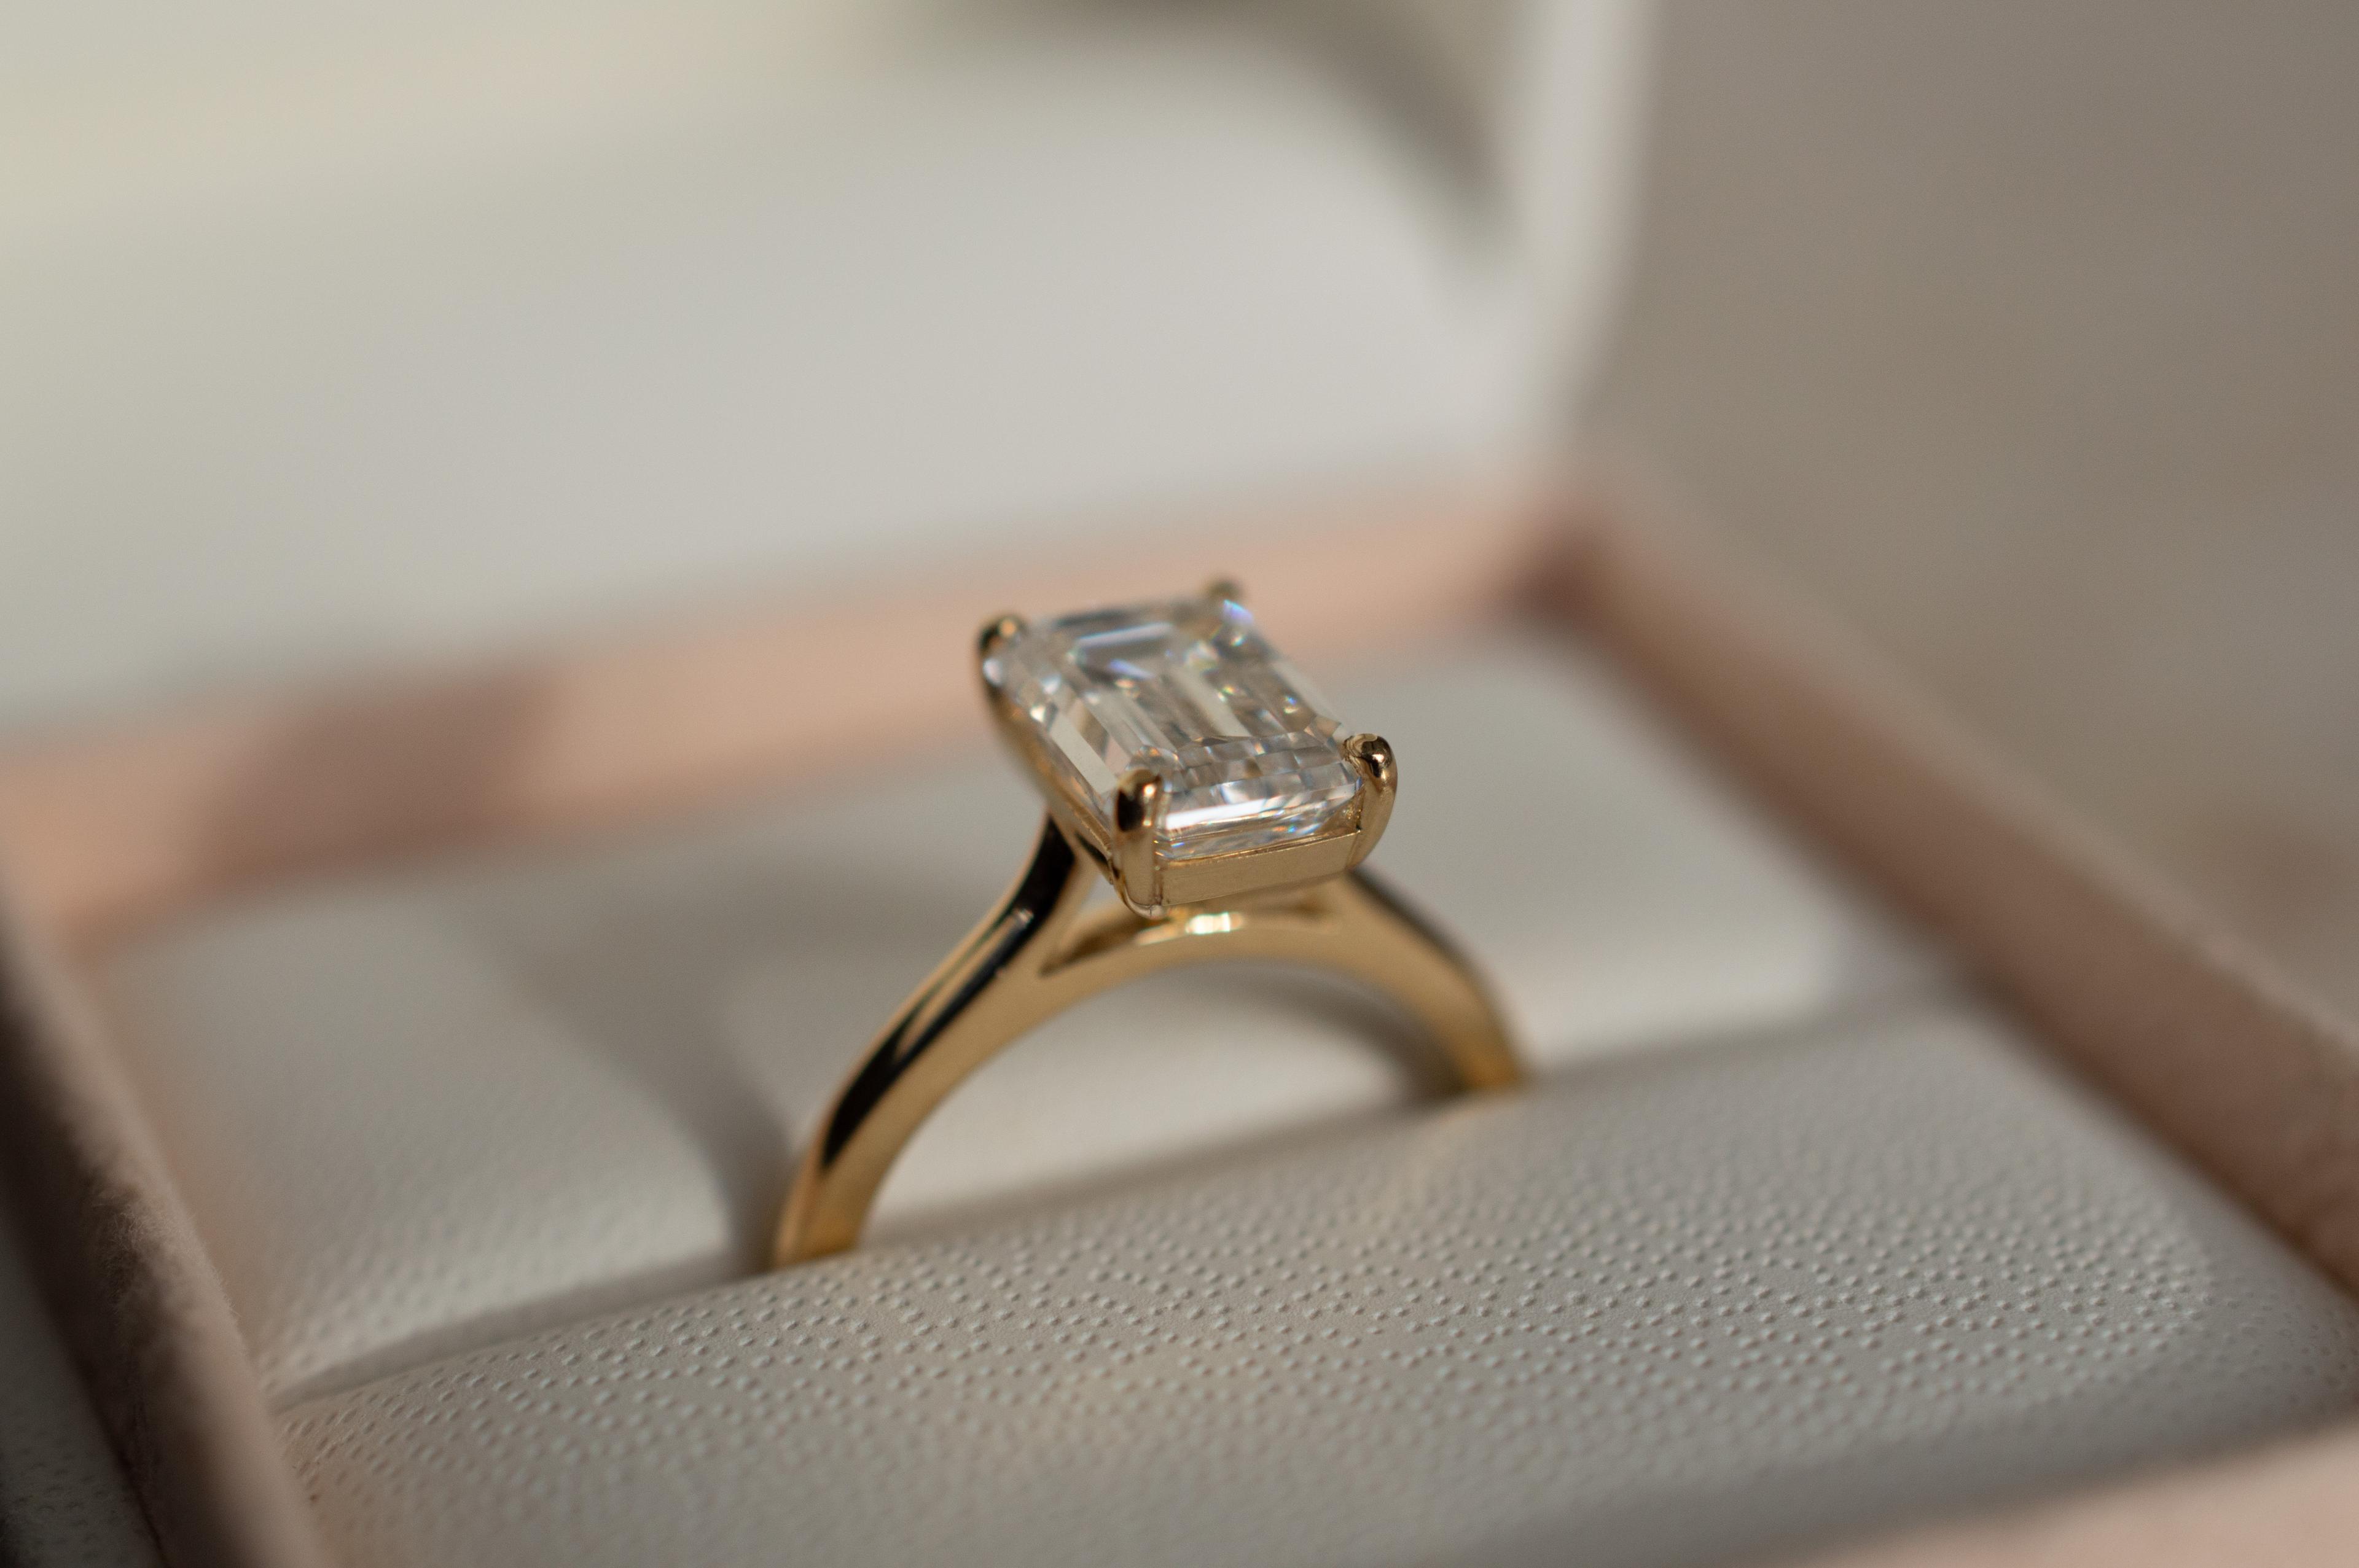 Emerald cut diamond with single bead prongs in a yellow gold band